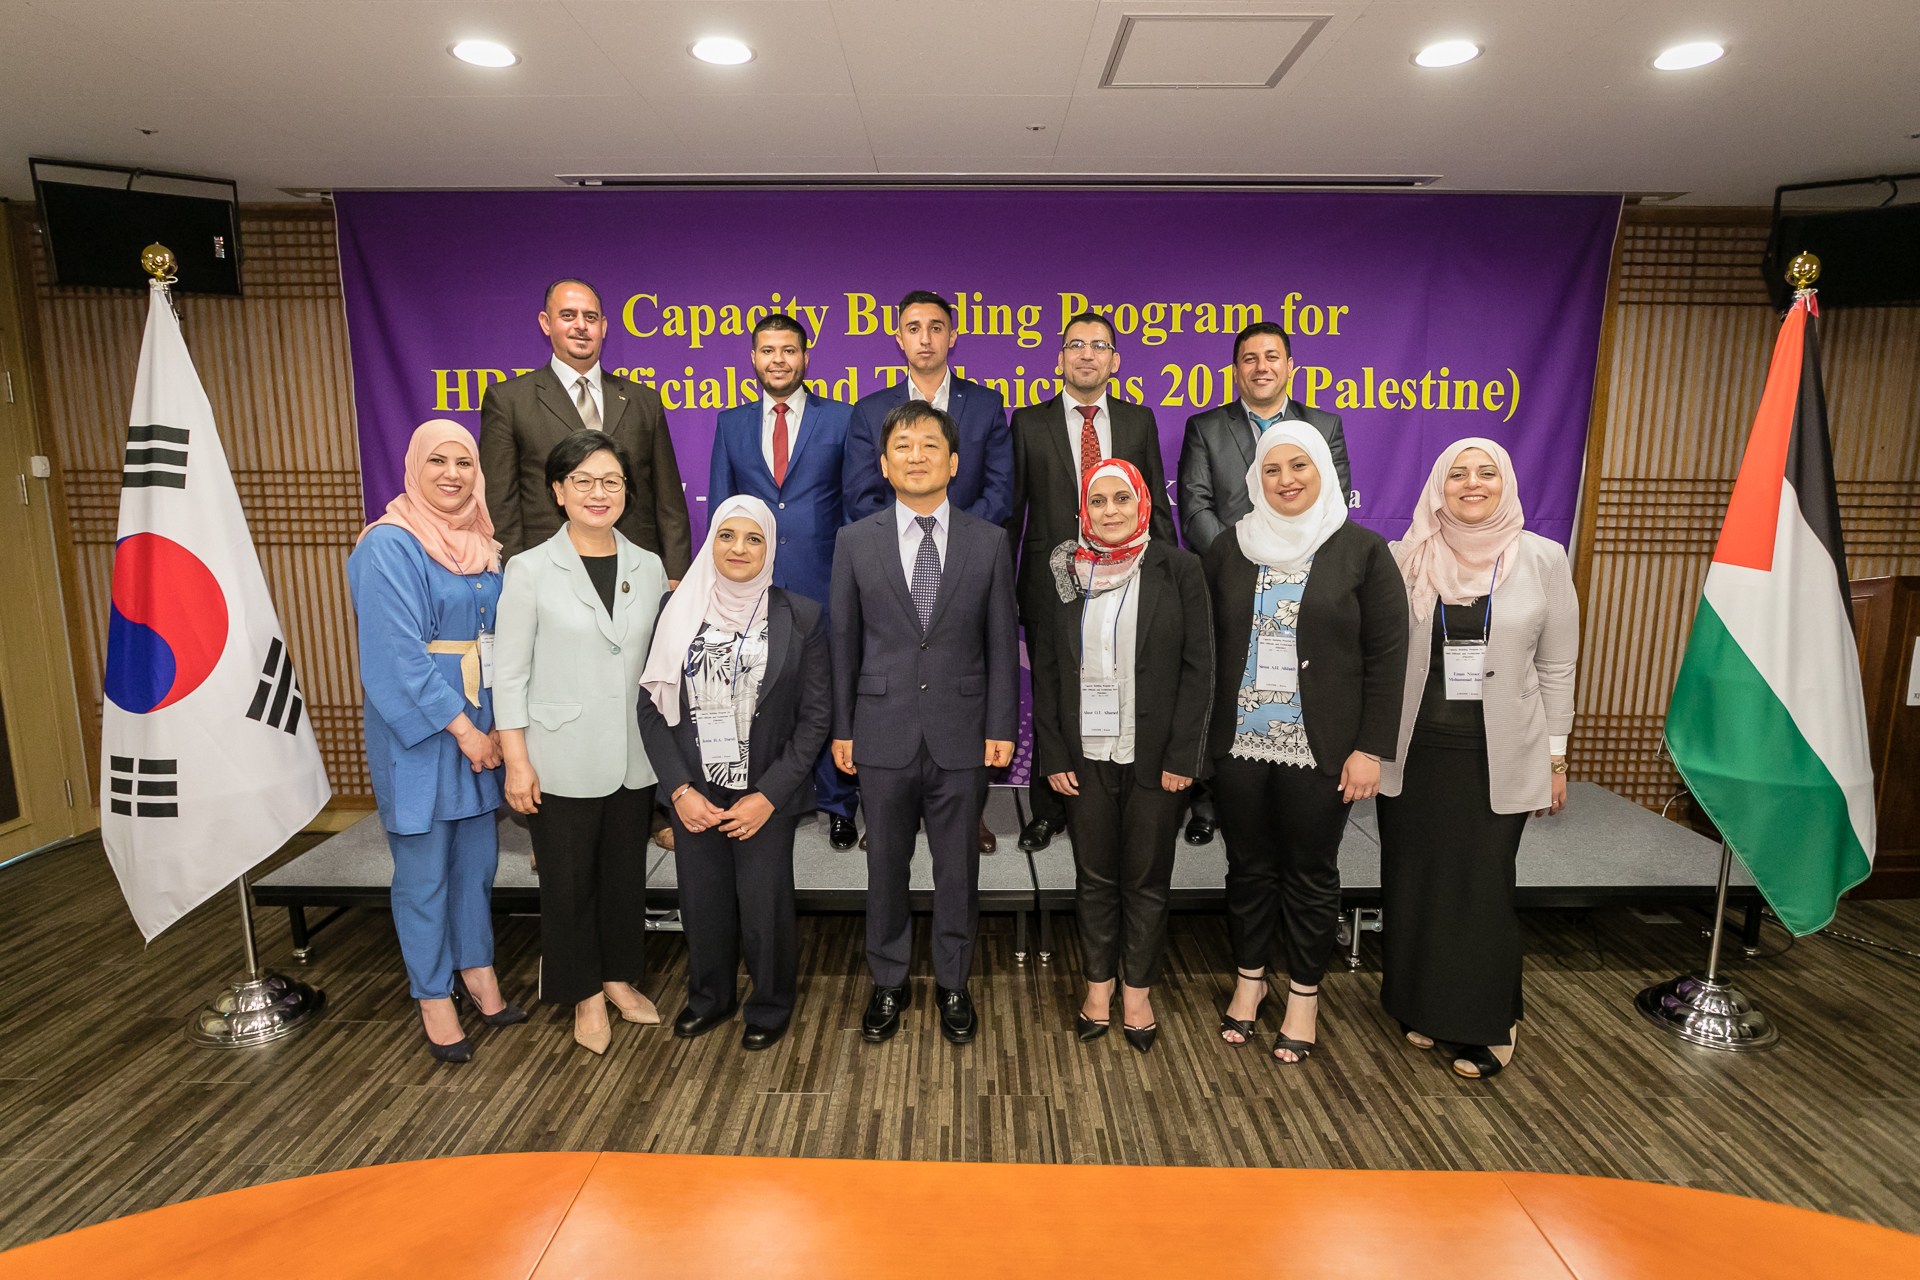 LOGODI implements capacity building program for 10 officials from Palestine National School of Administration %28PNSA%29 큰 이미지[마우스 클릭 시 창닫기]